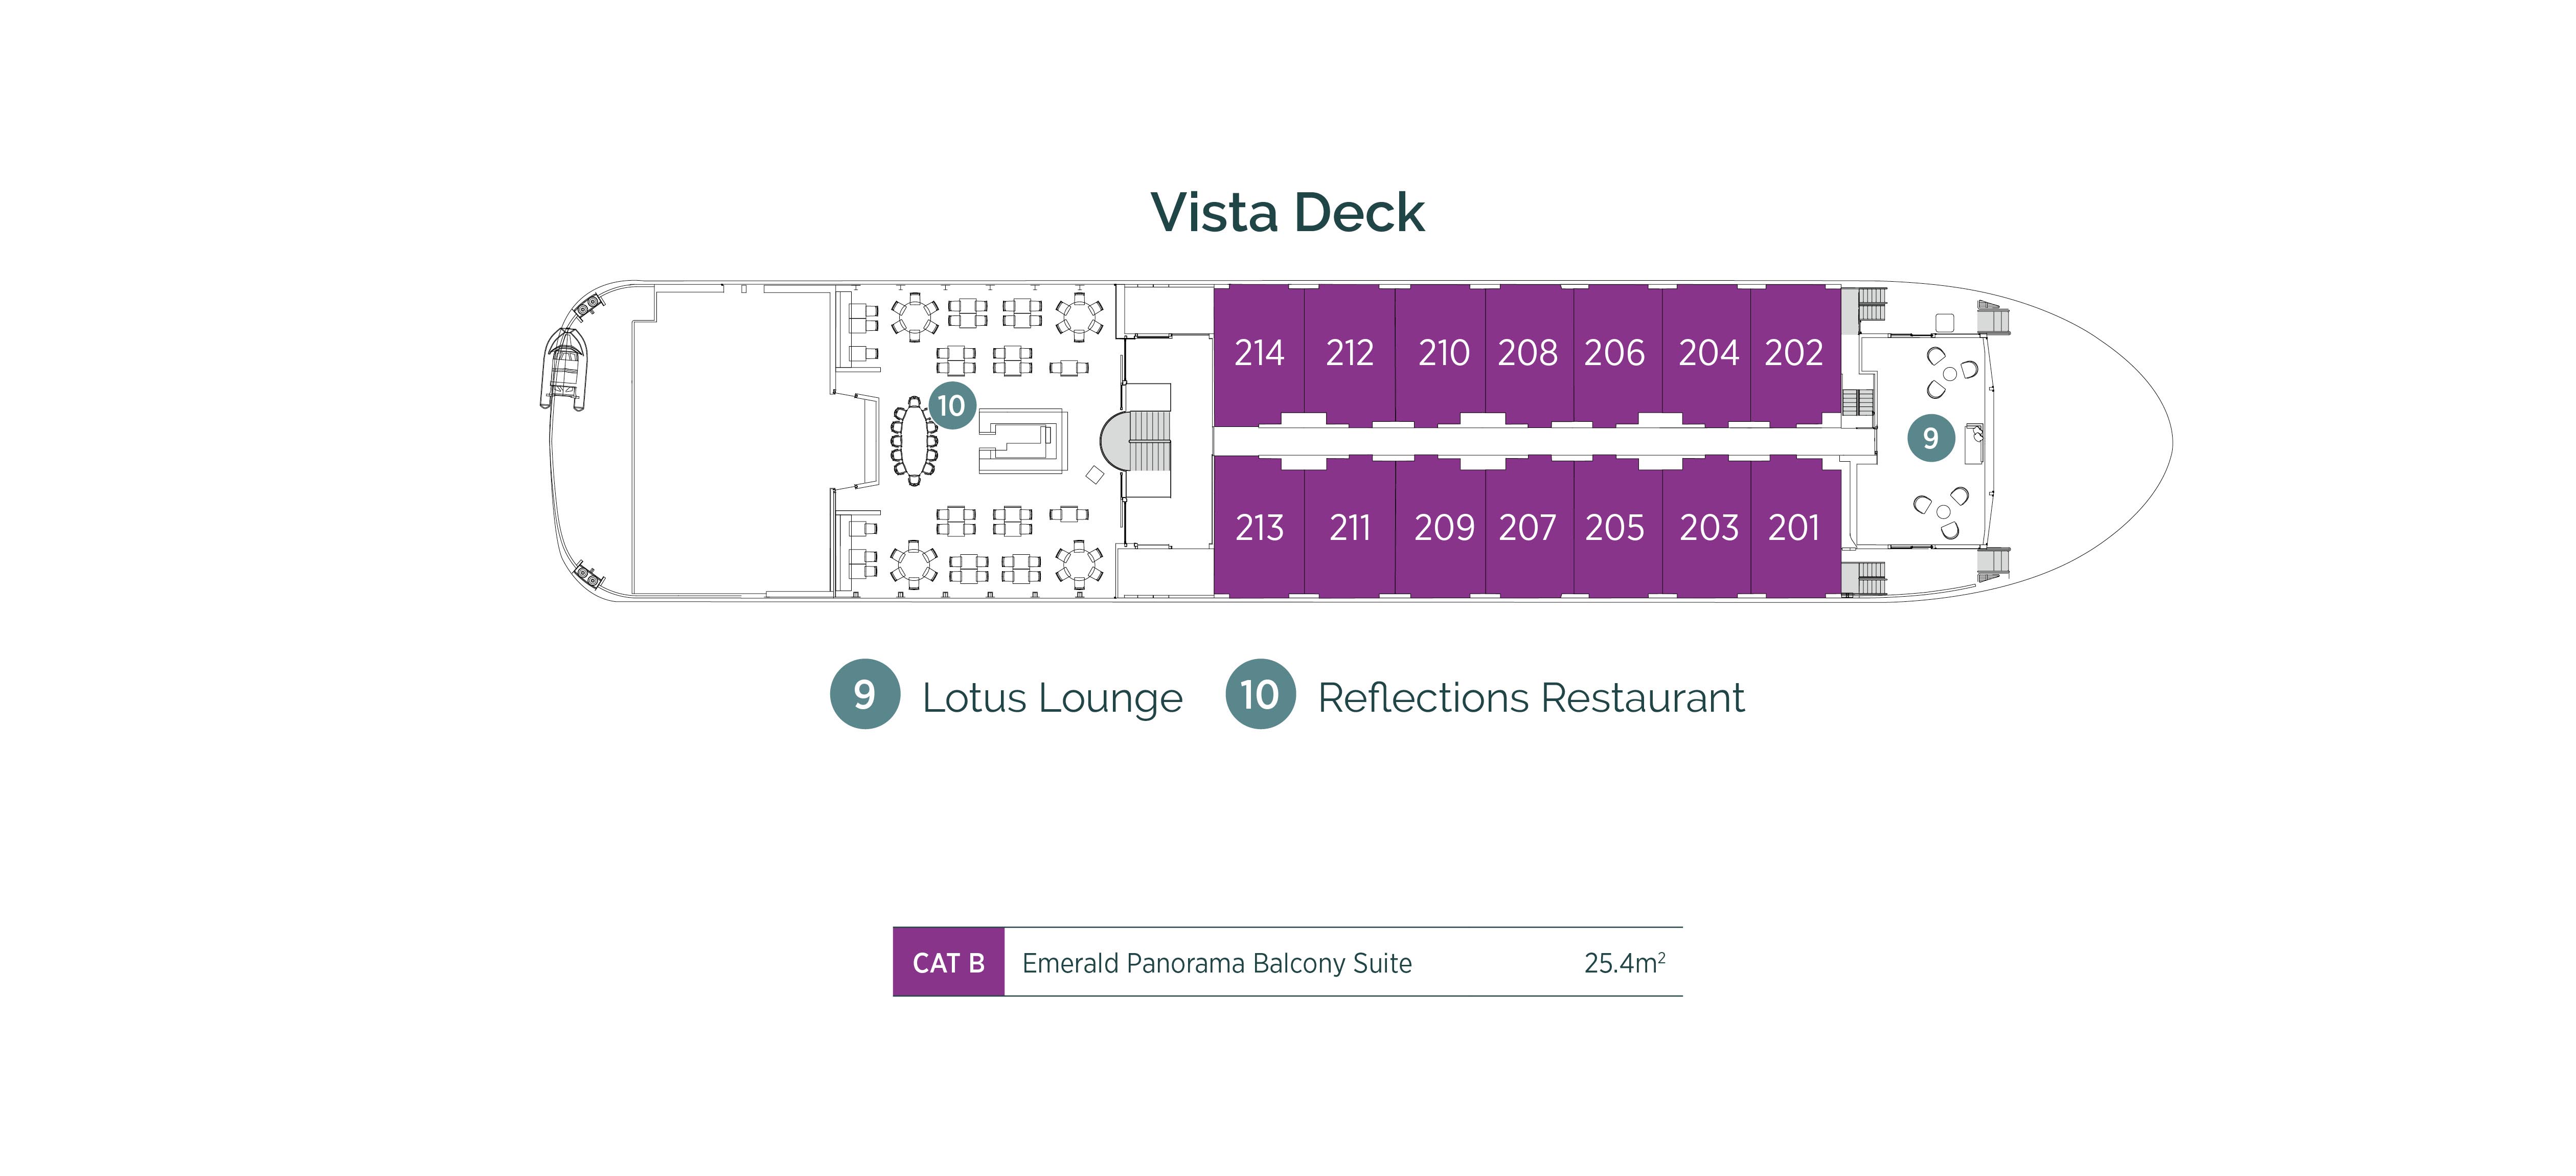 Diagram of ship layout for the Vista Deck of Emerald Cruises’ Mekong river cruising Star-Ship, Emerald Harmony